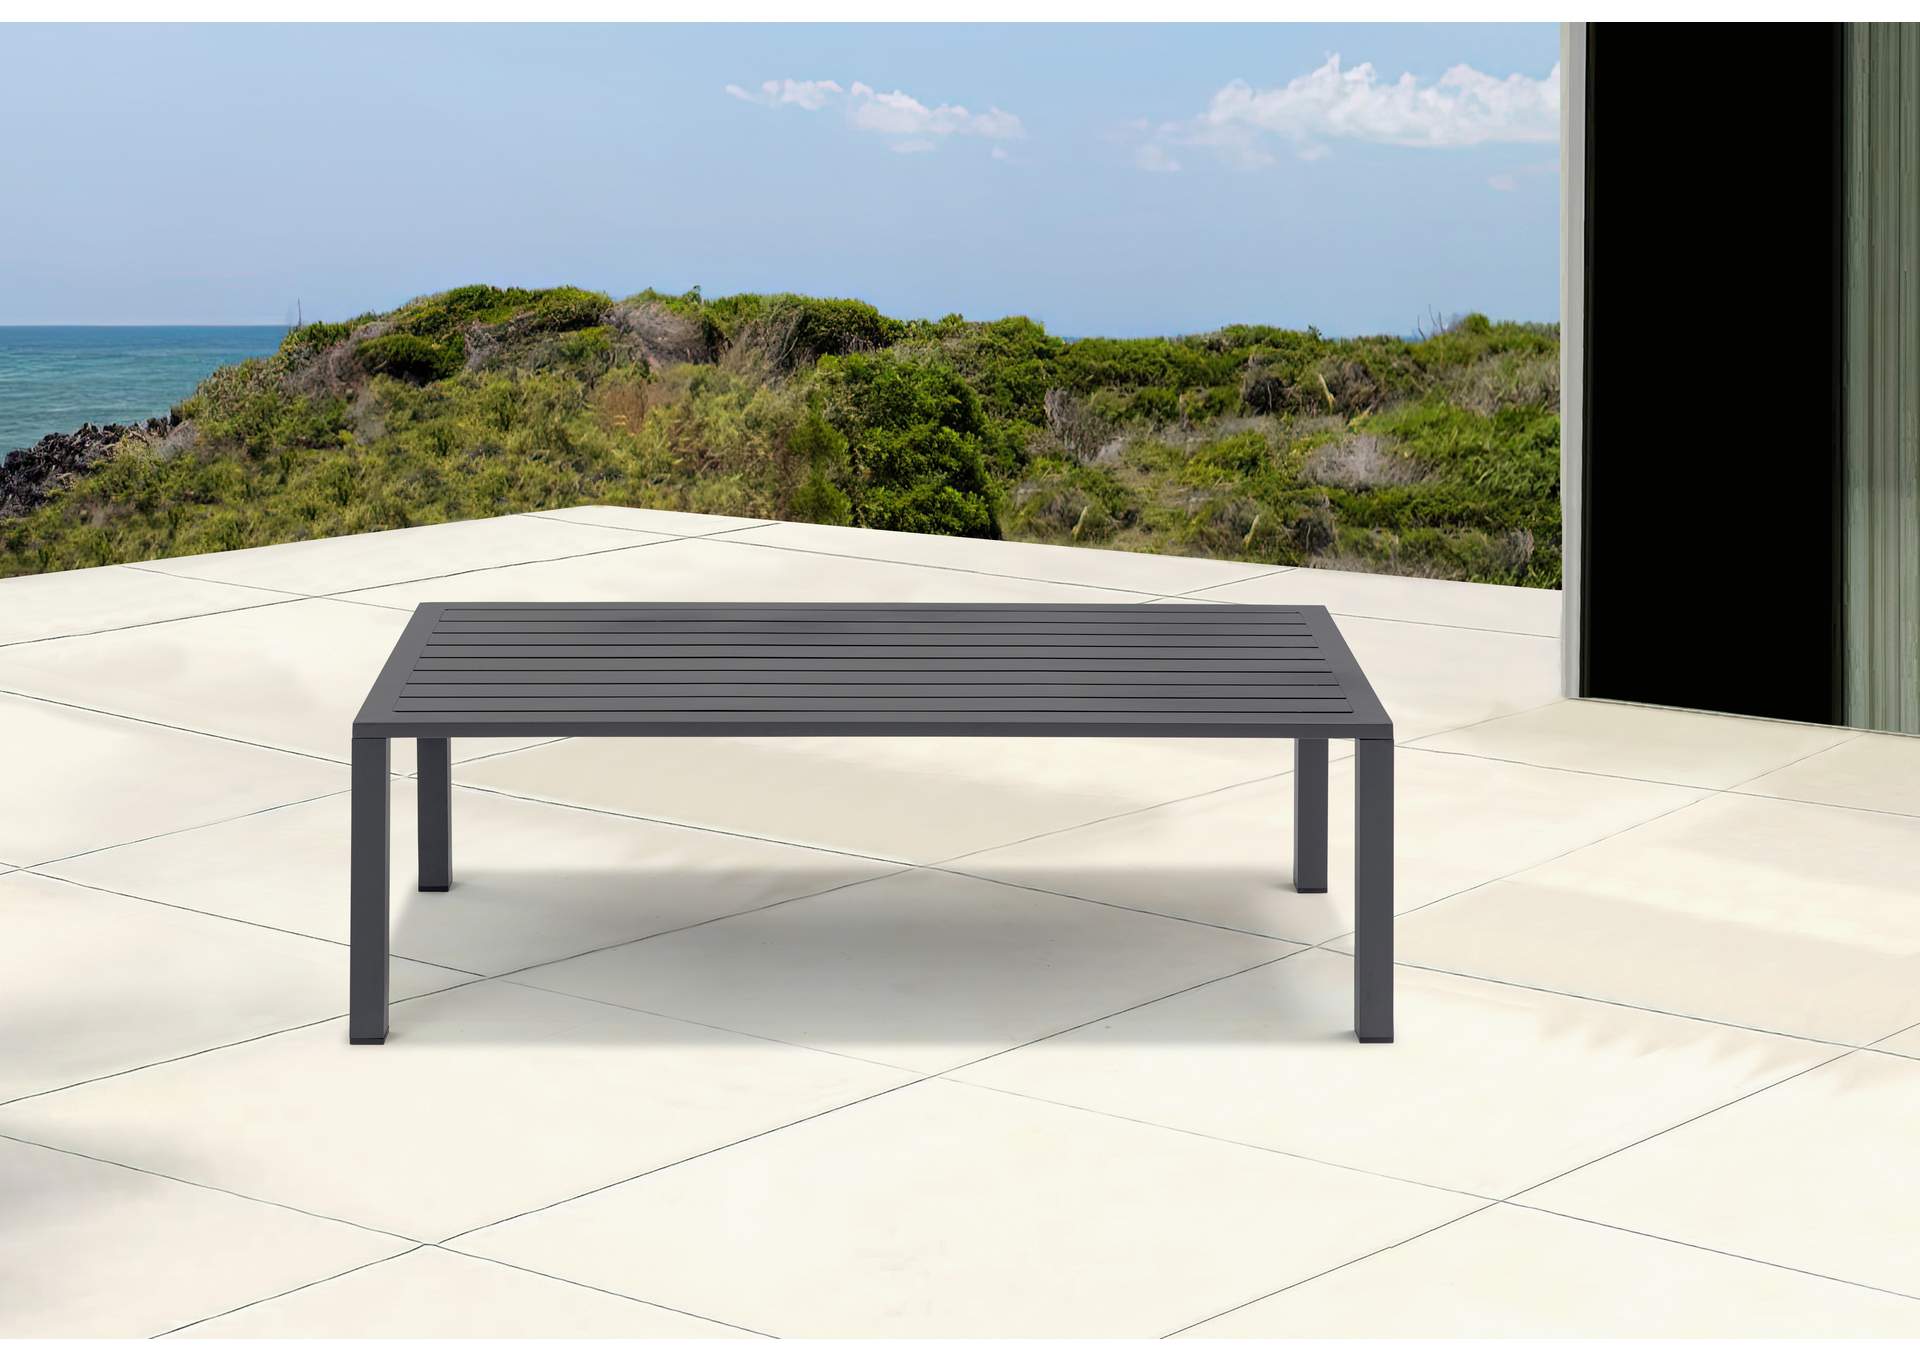 Maldives Outdoor Patio Coffee Table,Meridian Furniture